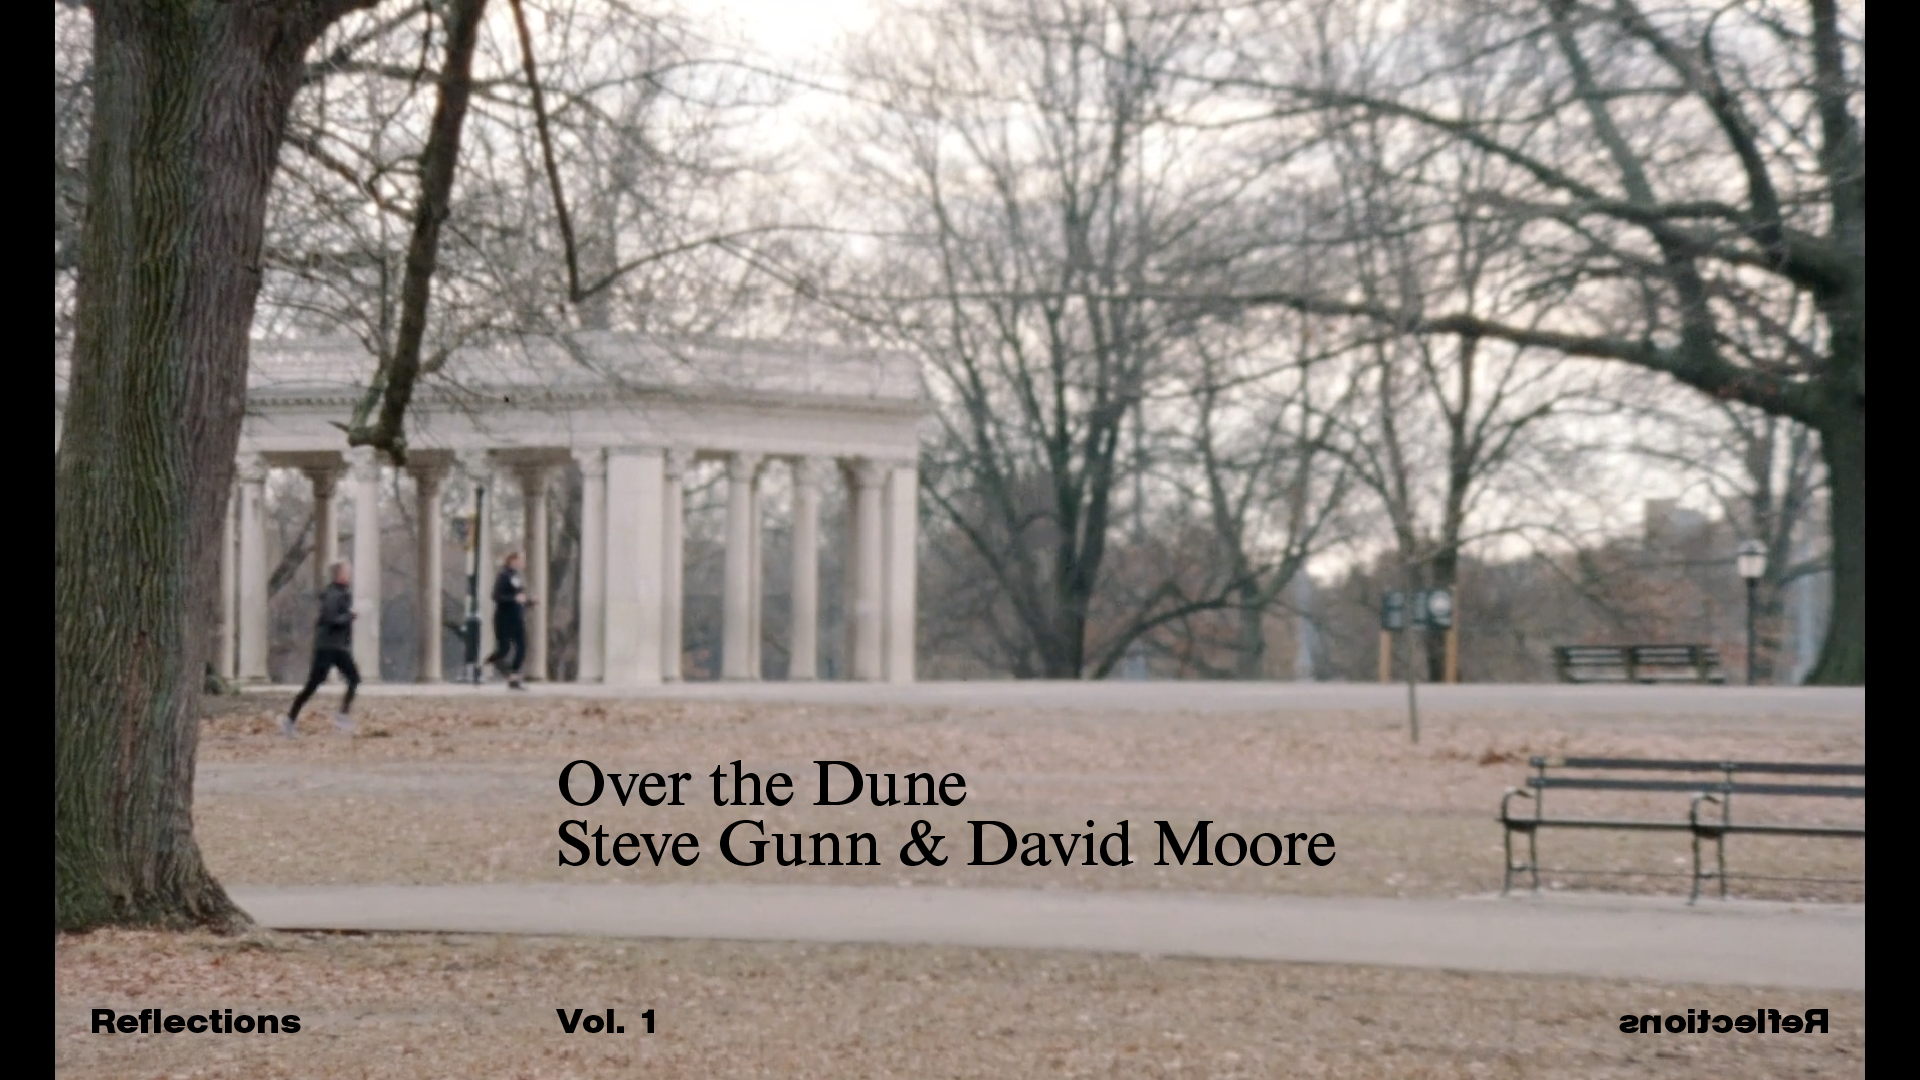 Link to Video for Steve Gunn & David Moore – Over the Dune [Official Video]